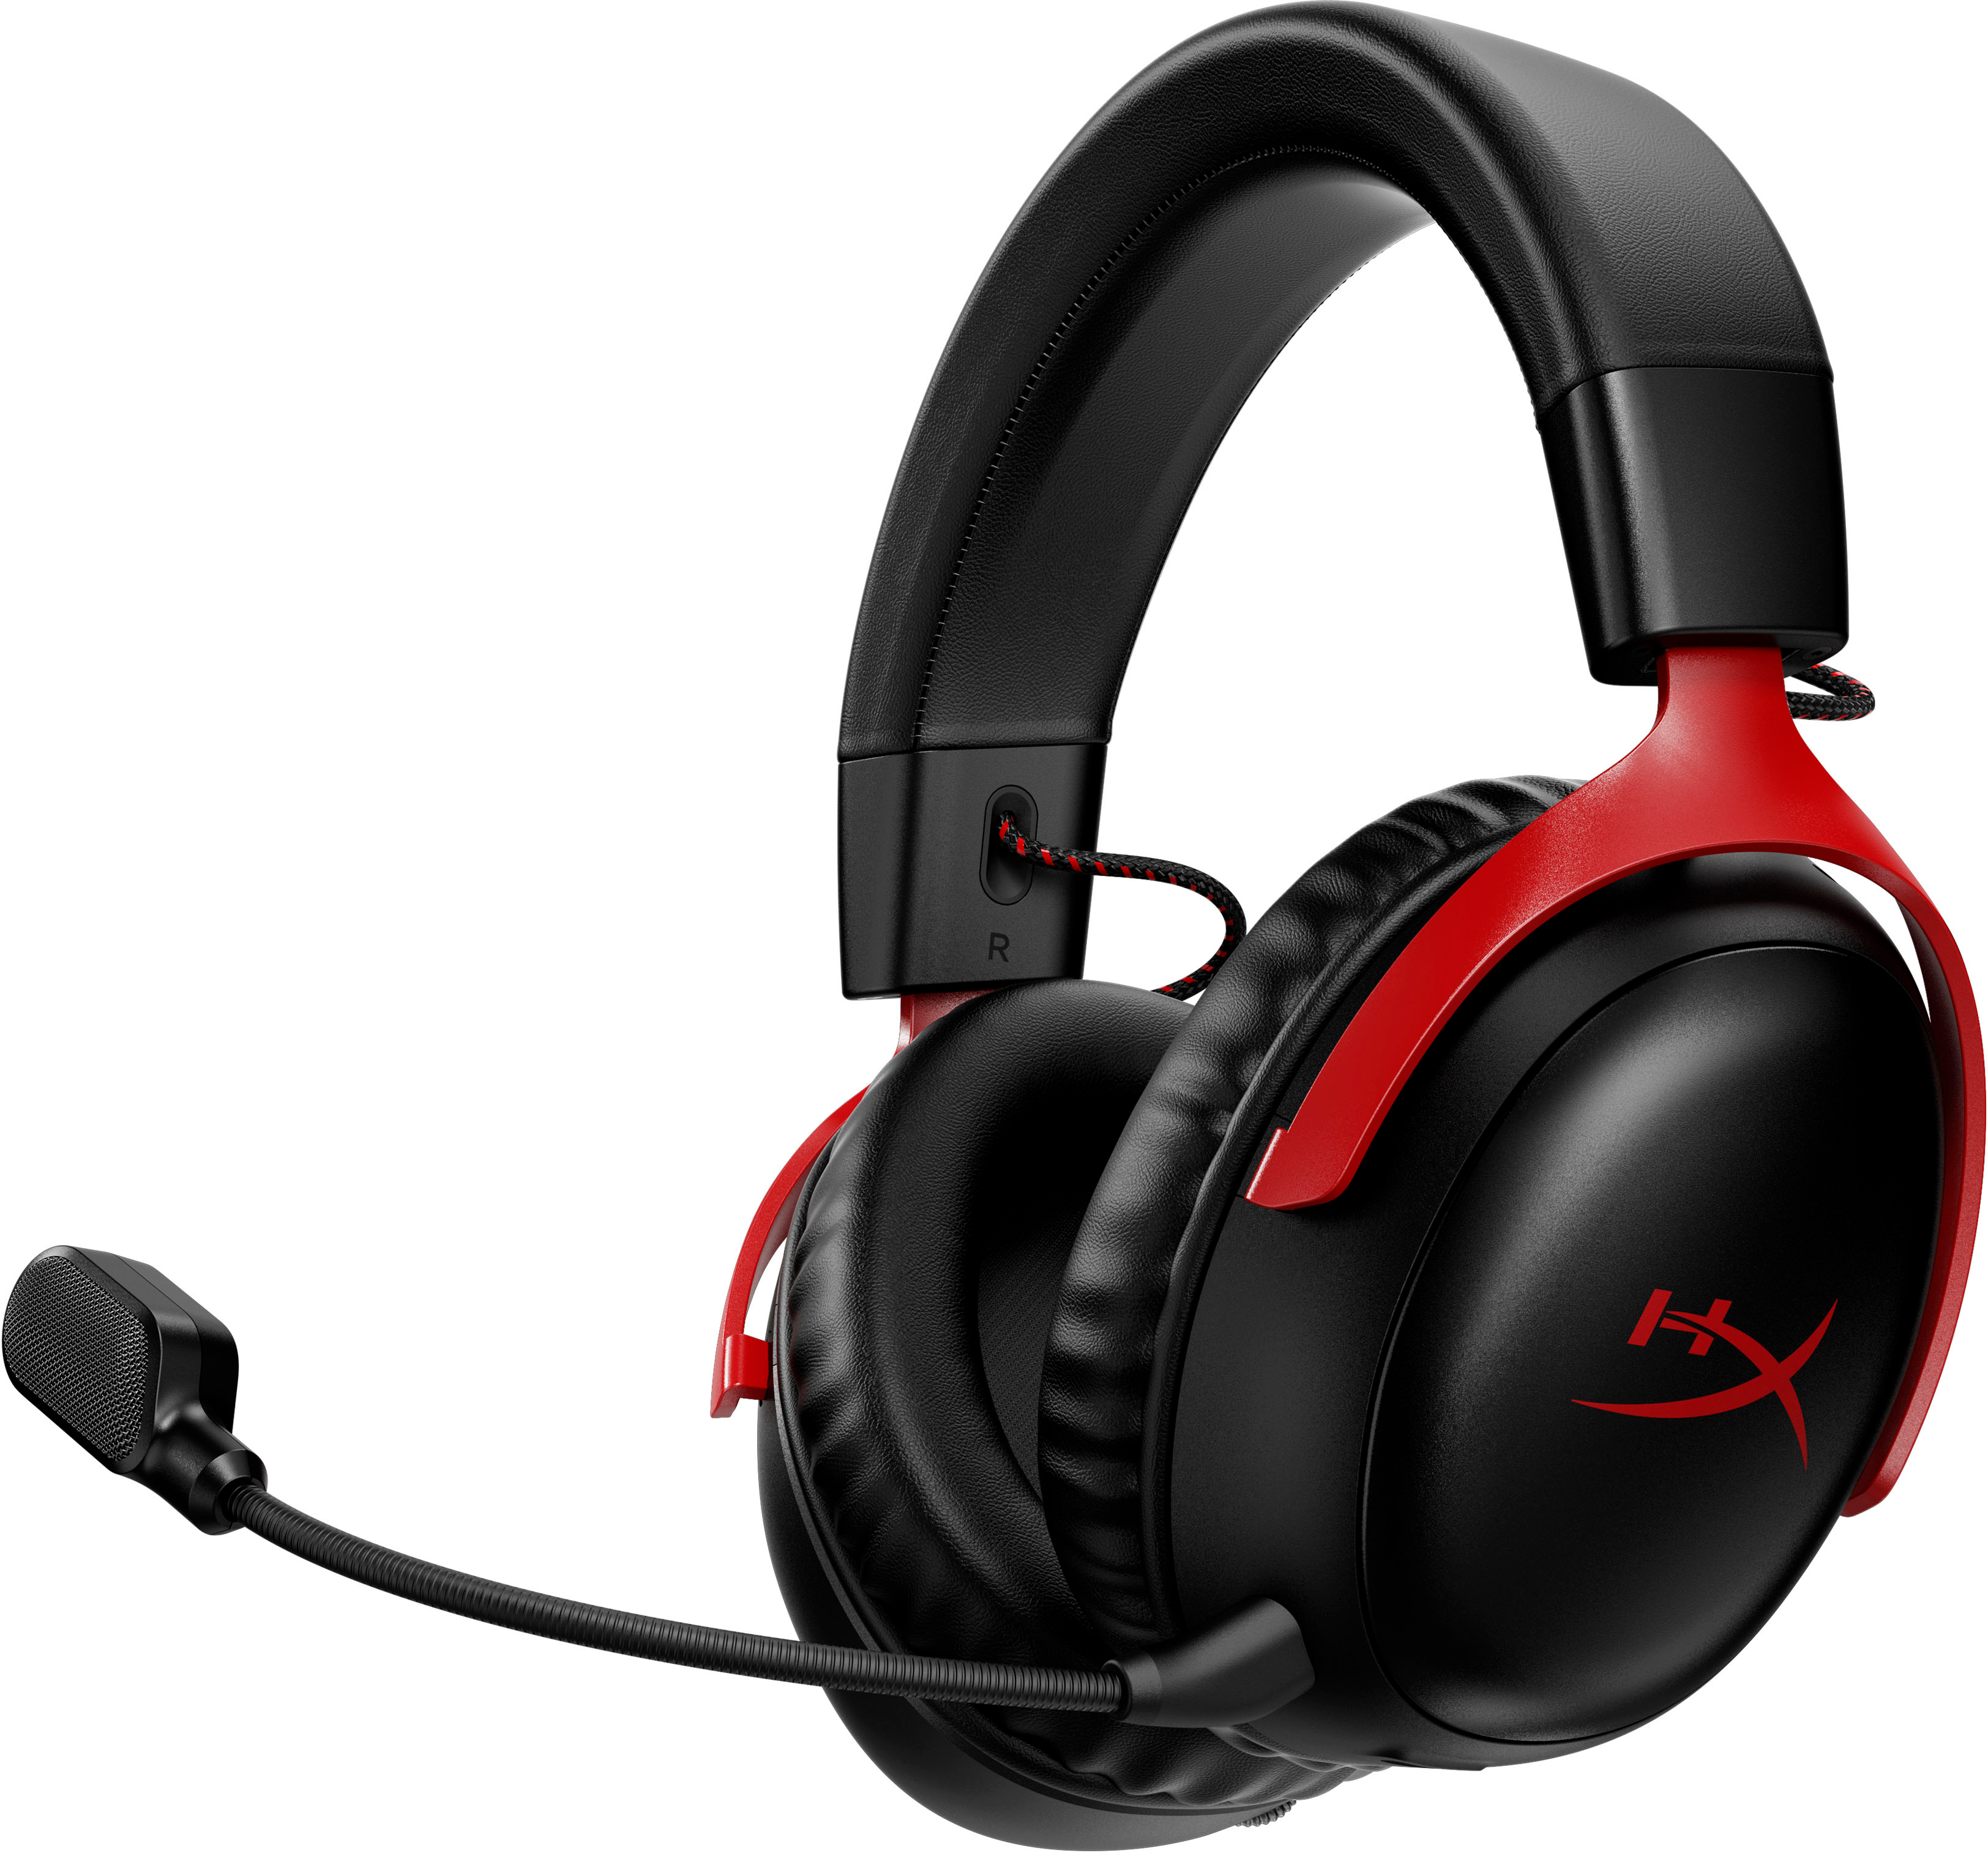  HyperX Cloud Flight - Wireless Gaming Headset, Long Lasting  Battery up to 30 Hours, Detachable Noise Cancelling Microphone, Red LED  Light, Comfortable Memory Foam, Works with PC, PS4 & PS5 